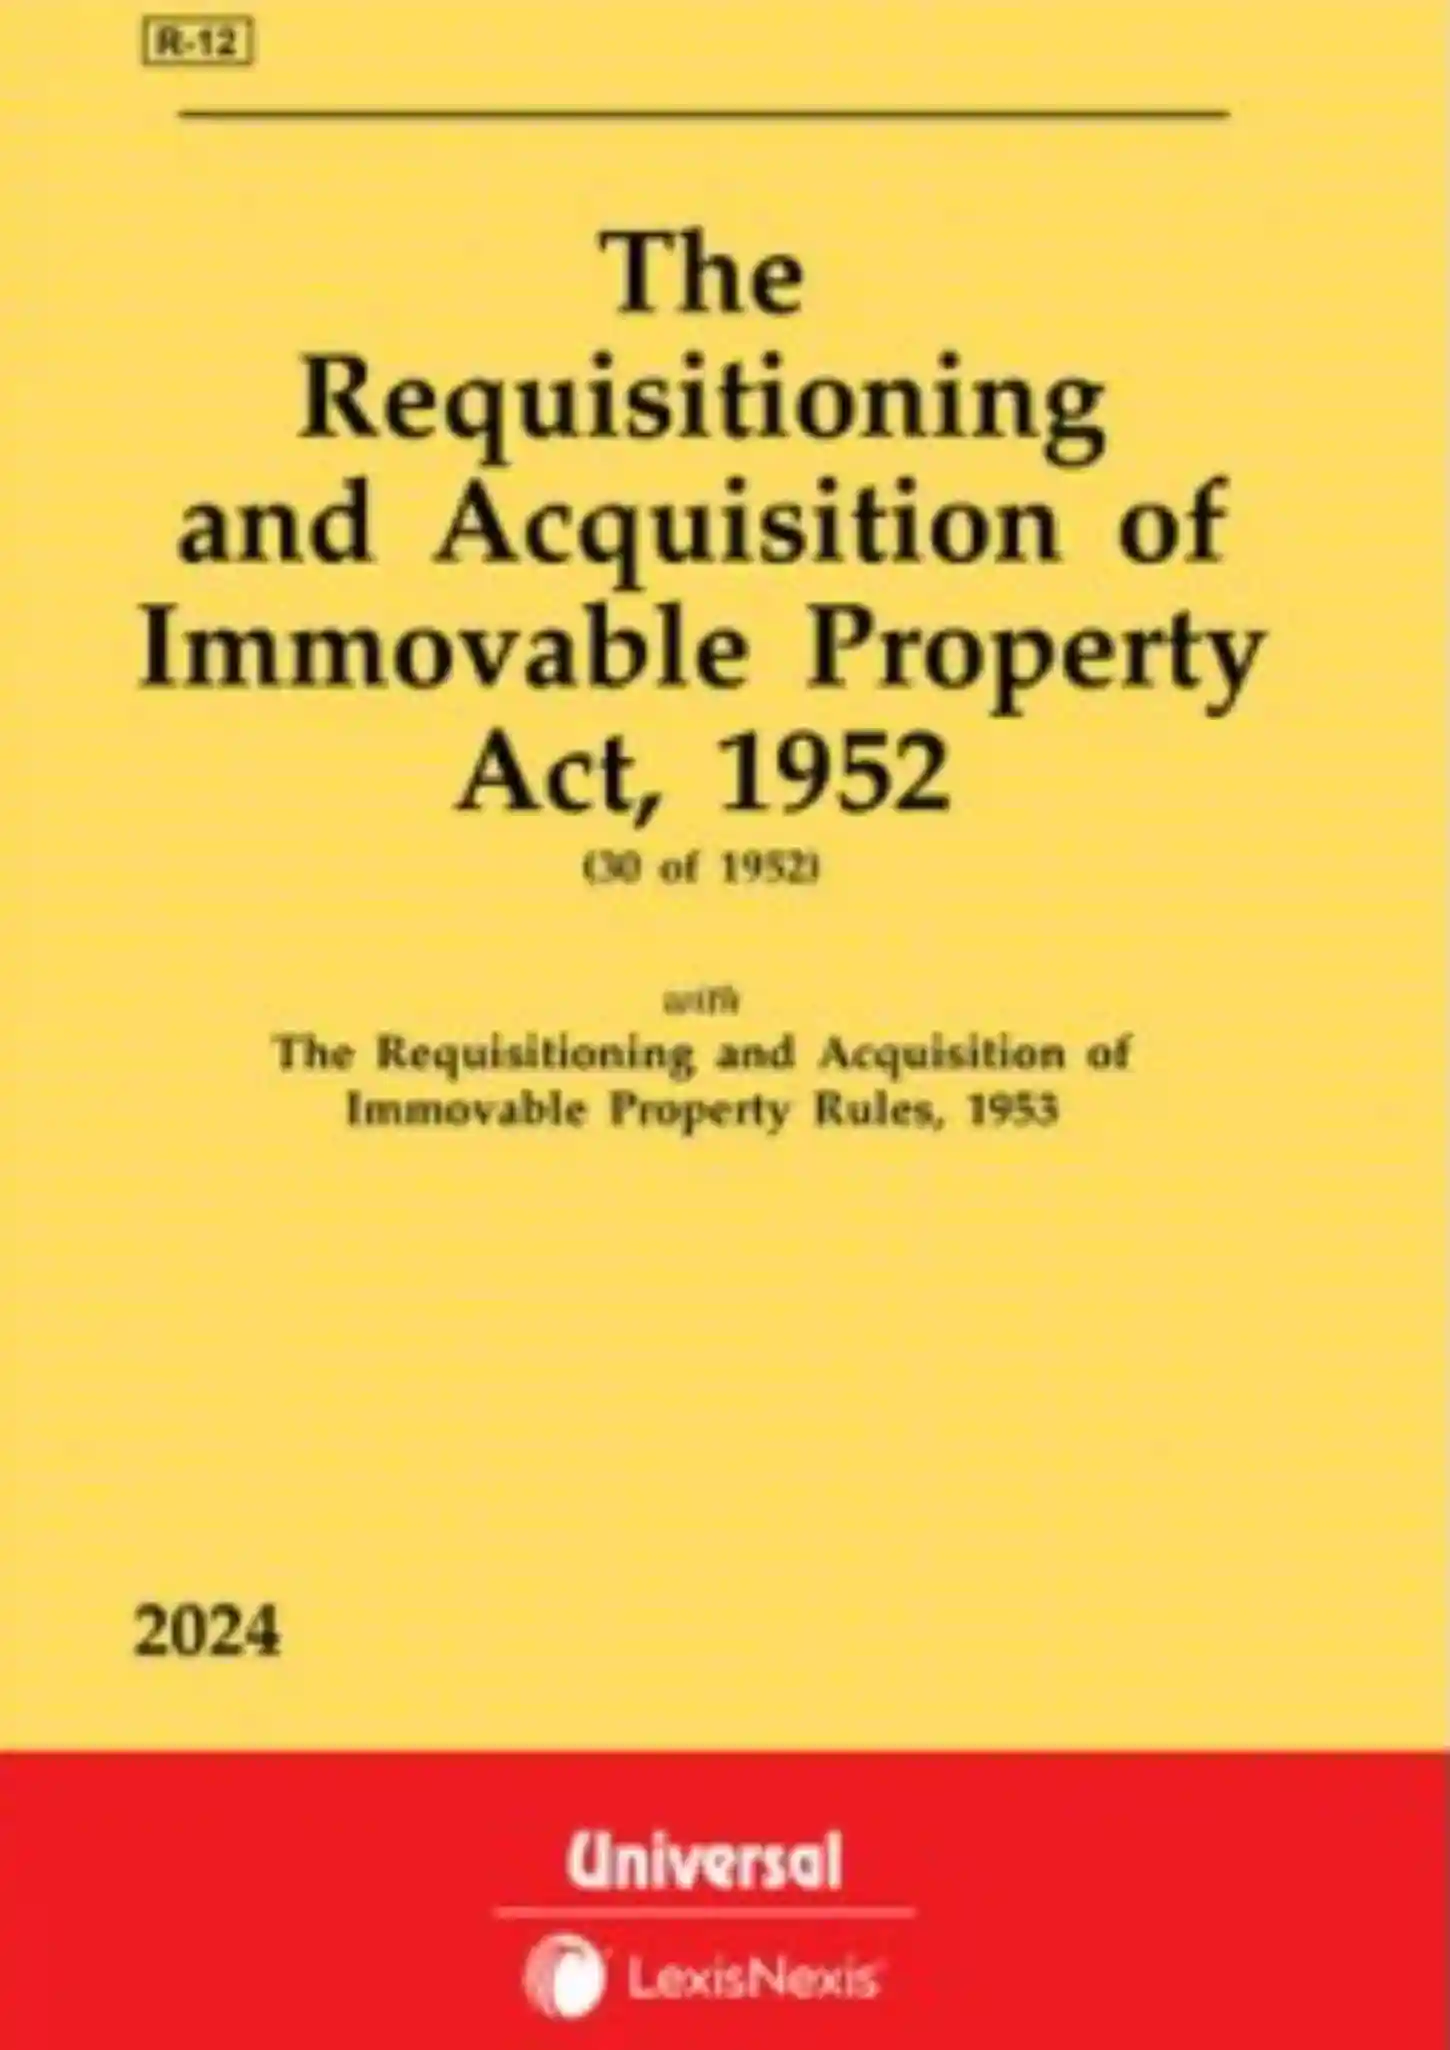 Requisitioning and Acquisition of Immovable Property Act, 1952